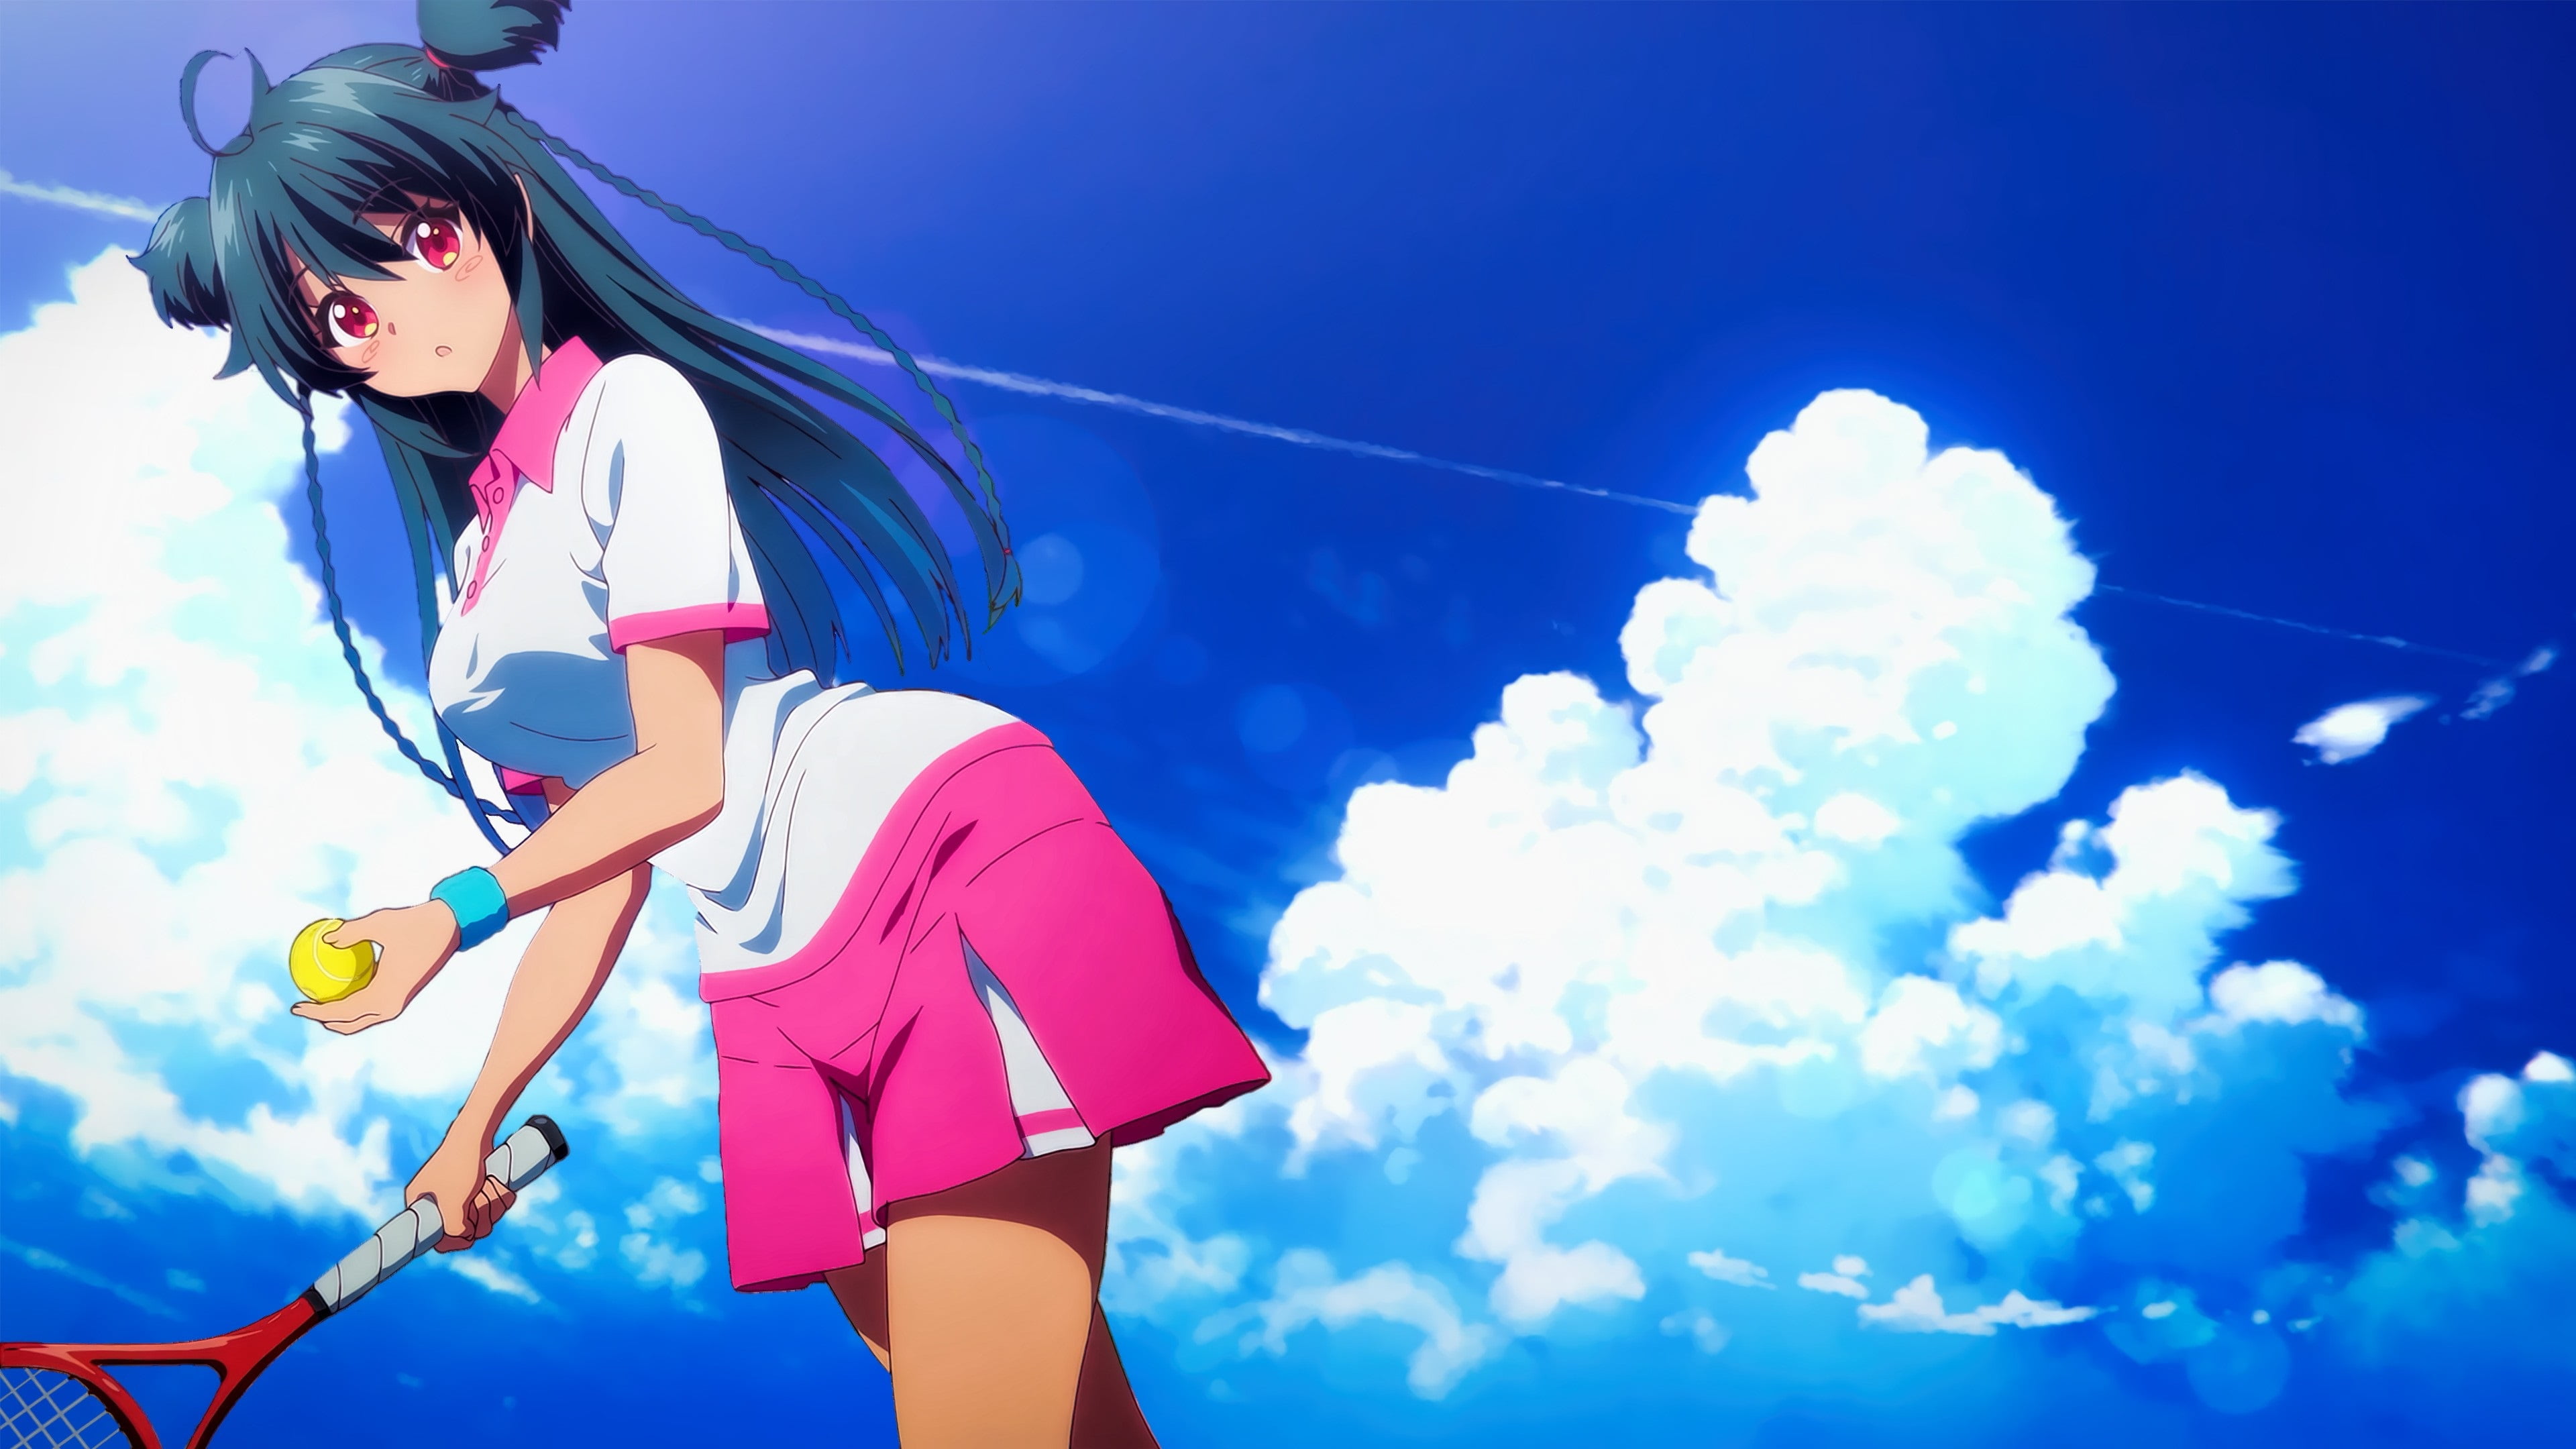 750x1334 Resolution Female Anime Character Holding Tennis Ball And Racket Hd Wallpaper